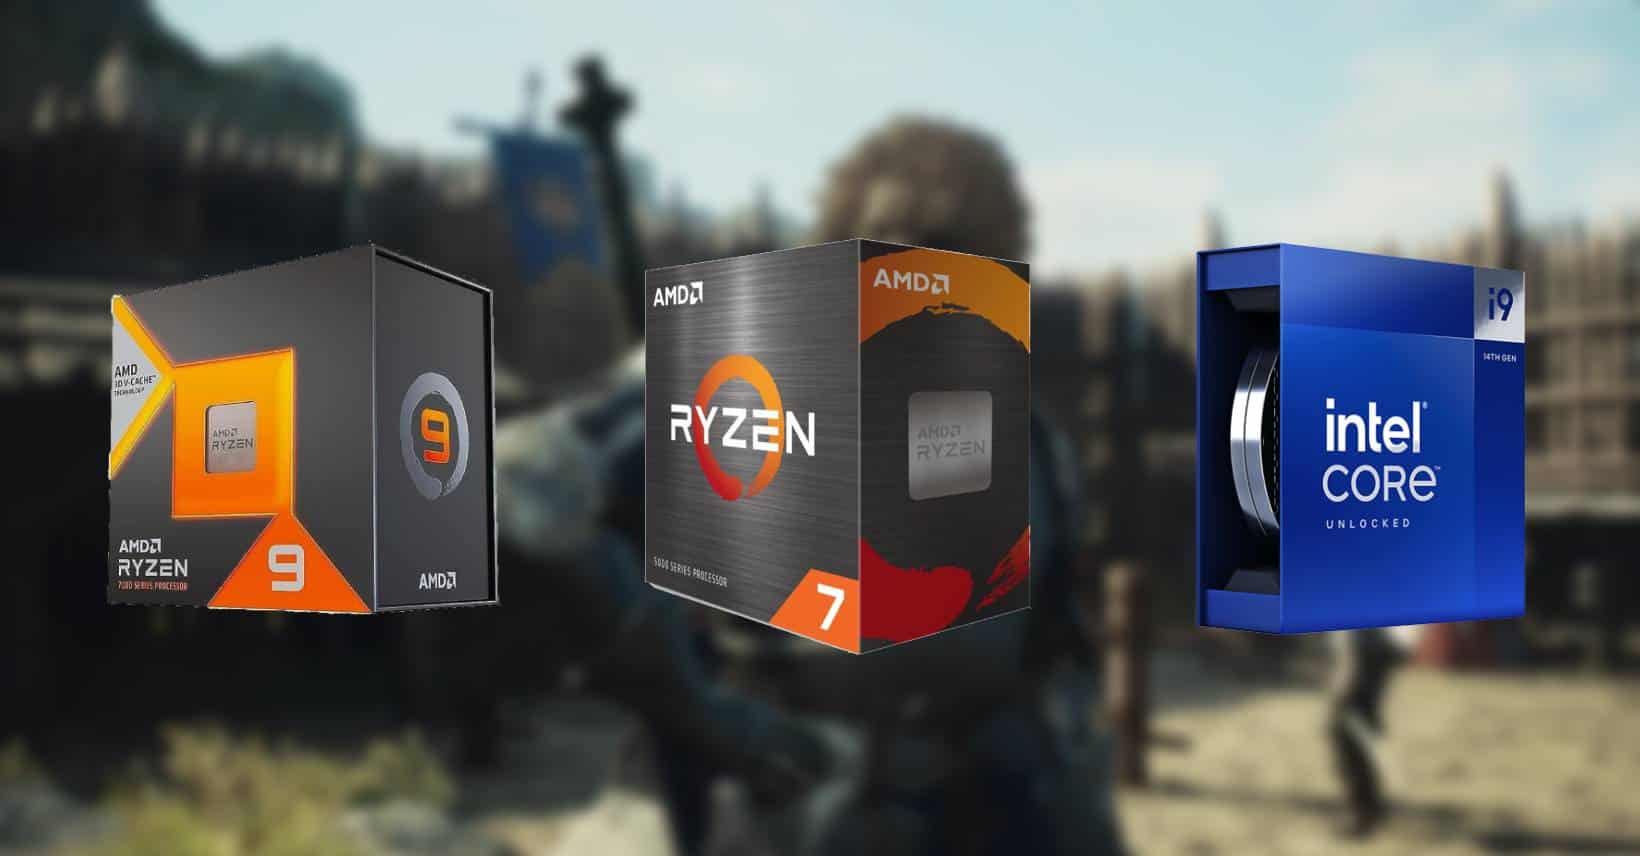 A visual comparison of processor packaging for amd ryzen 7, amd ryzen 9, and intel core i9, highlighting the best CPU for Dragon's Dogma 2.